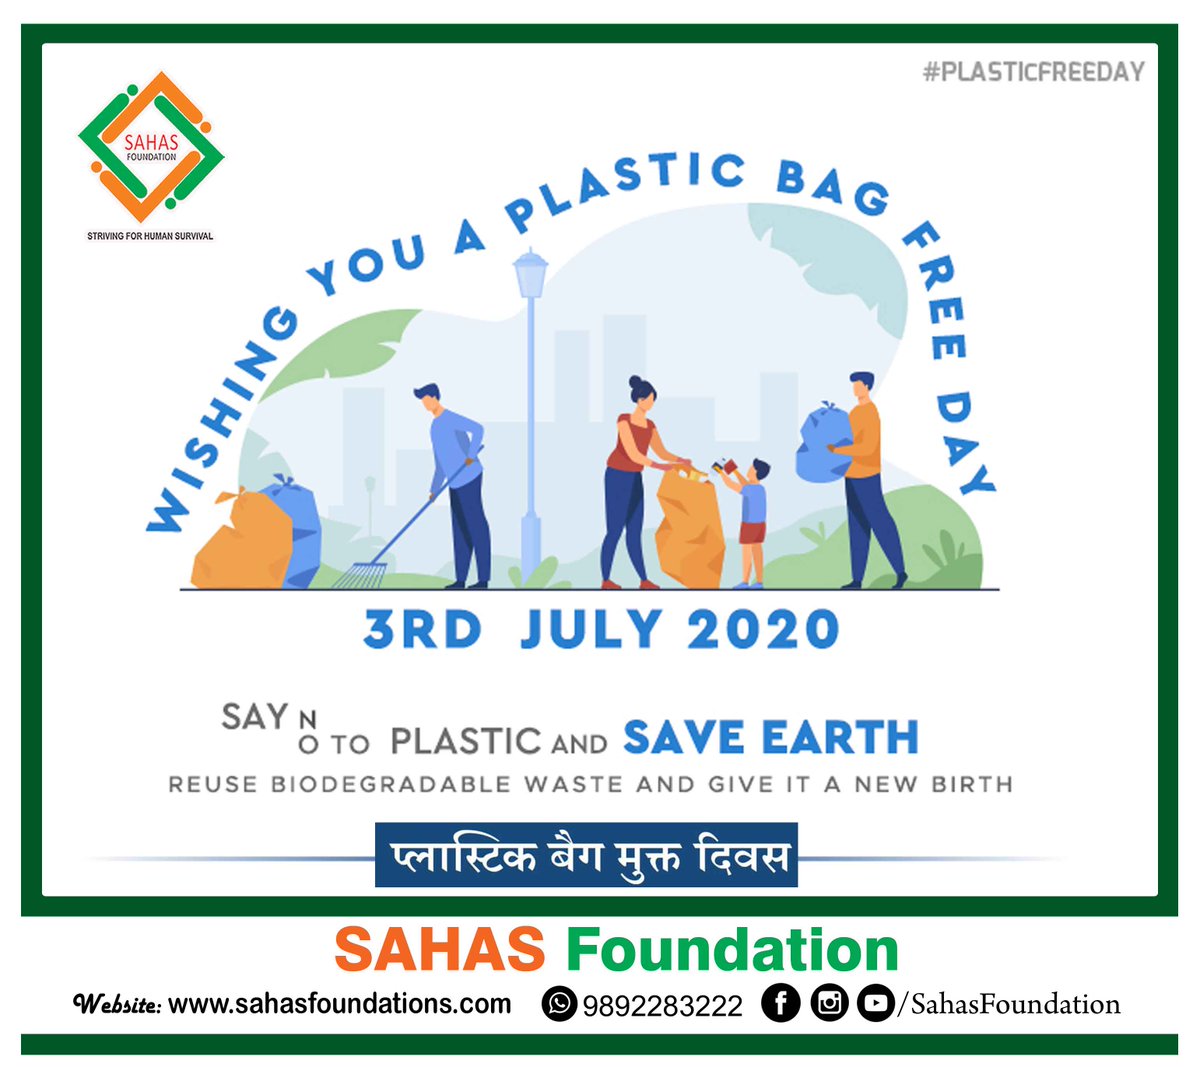 Let's pledge to reduce the burden of Mother Earth, by avoiding plastic. Change in the world will start from change in ourself. #PlasticBagFreeDay #InternationalPlasticBagFreeDay 
#NoPlasticBags #PlasticBagFreeDay #PlasticKills #PlasticOrPlanet #PlasticBags #PlasticFreeEarth